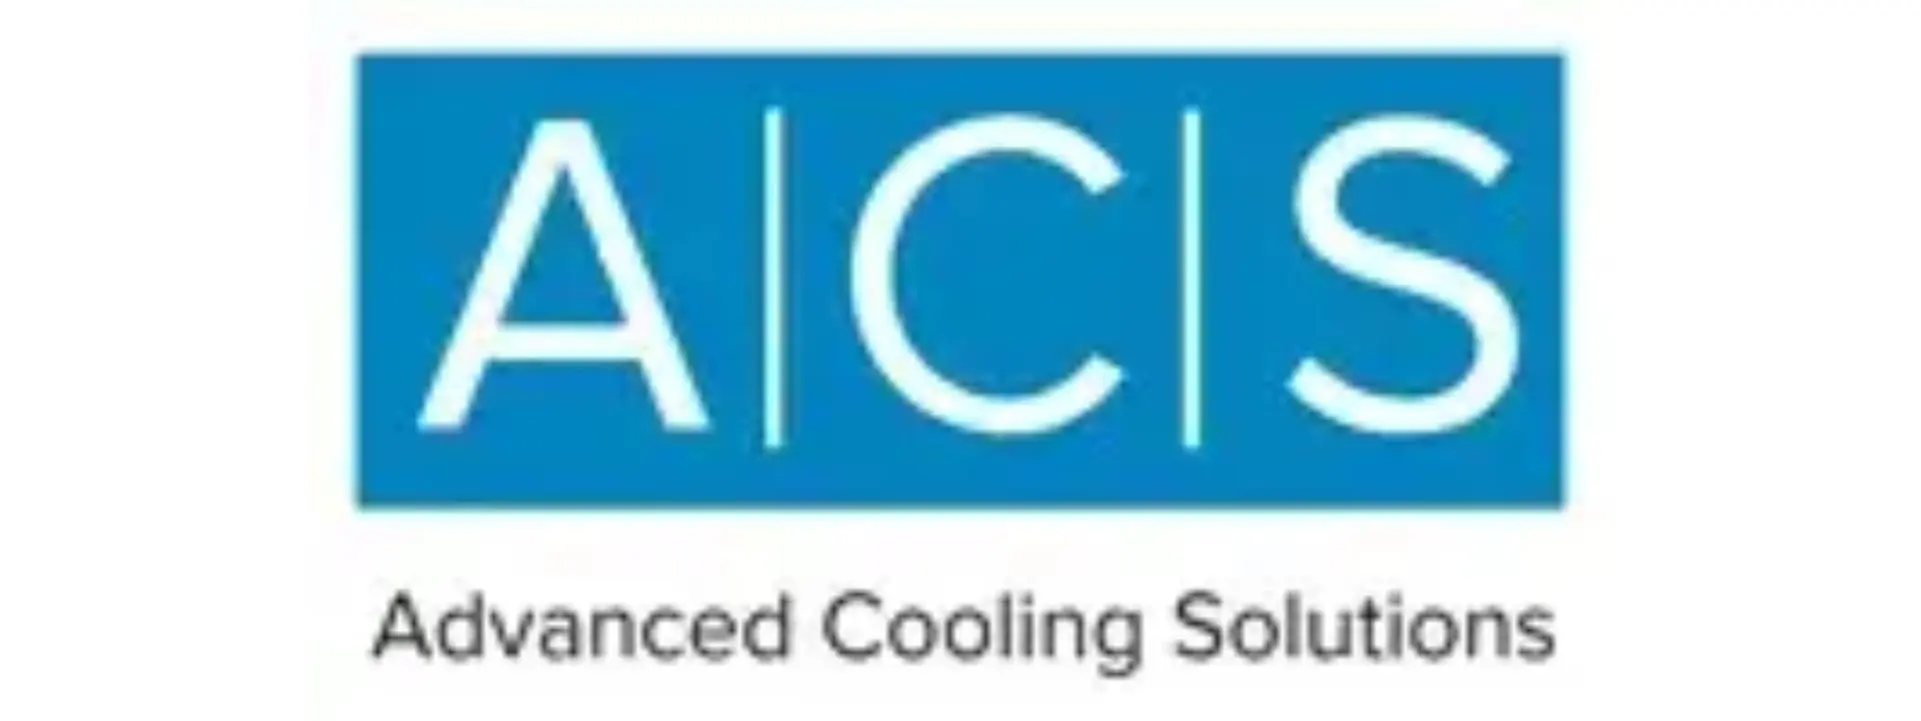 A blue and white logo for advanced cooling solutions.